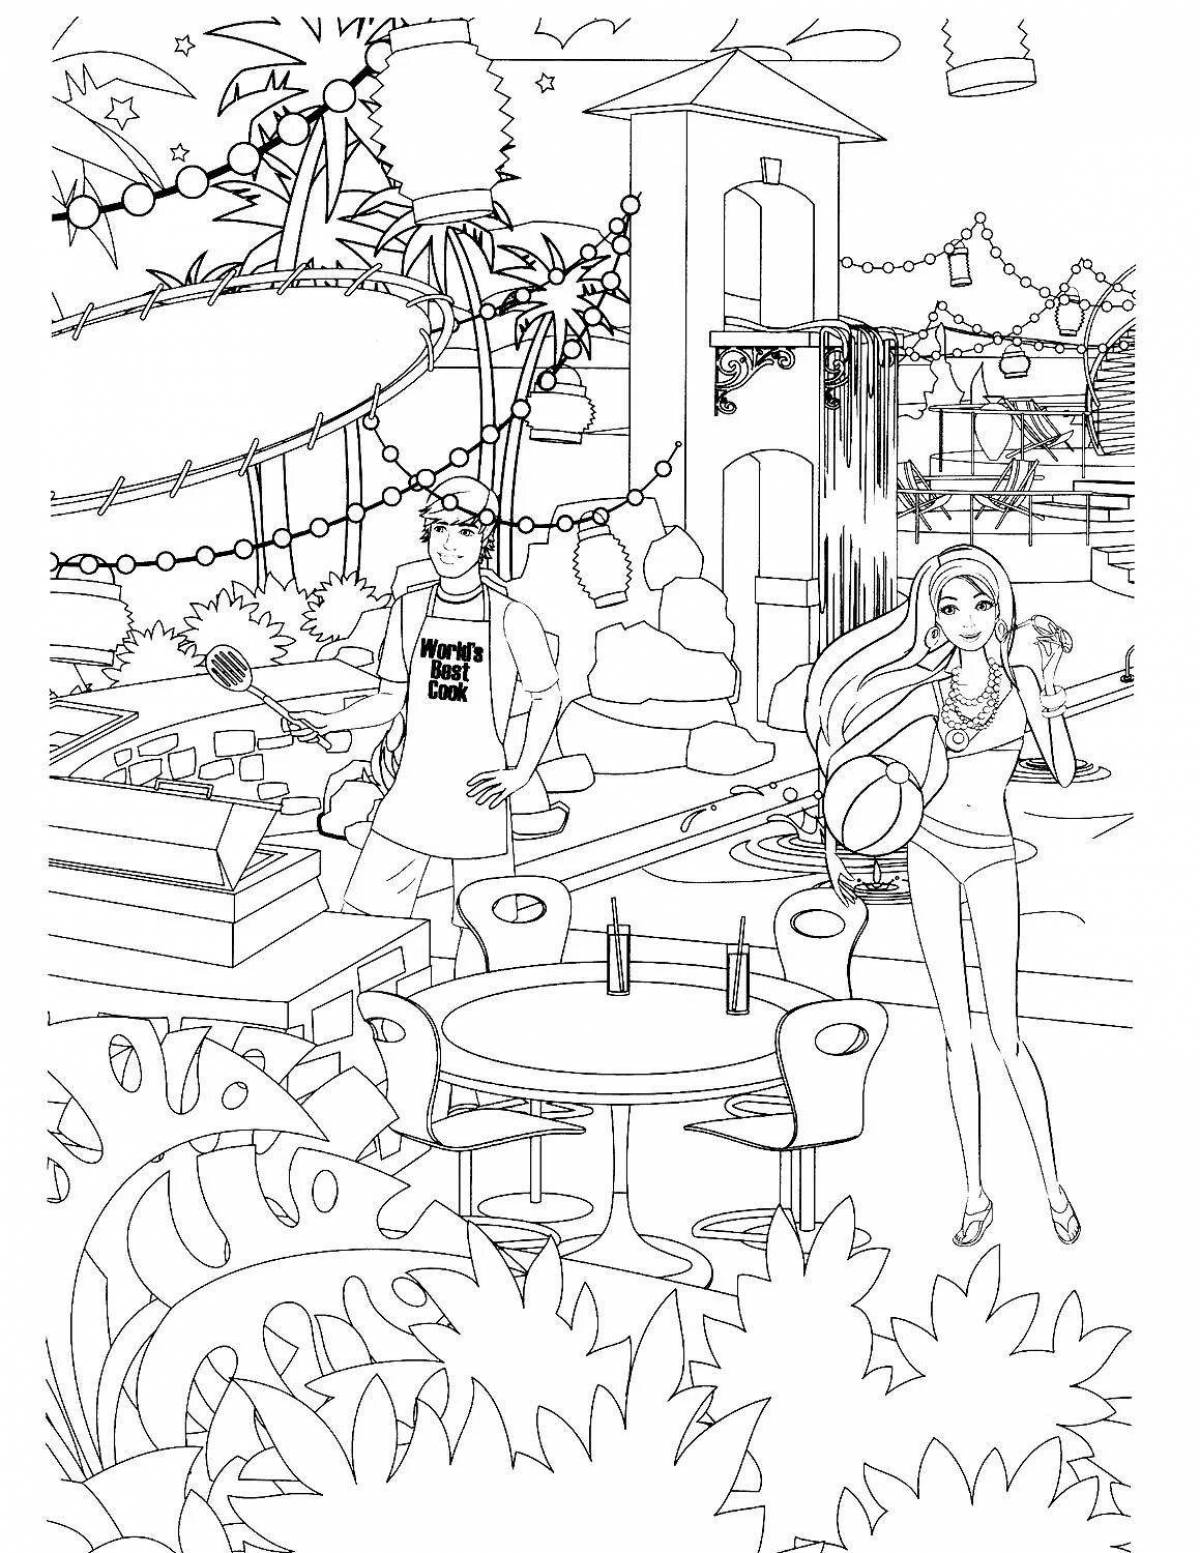 Playful barbie house coloring page